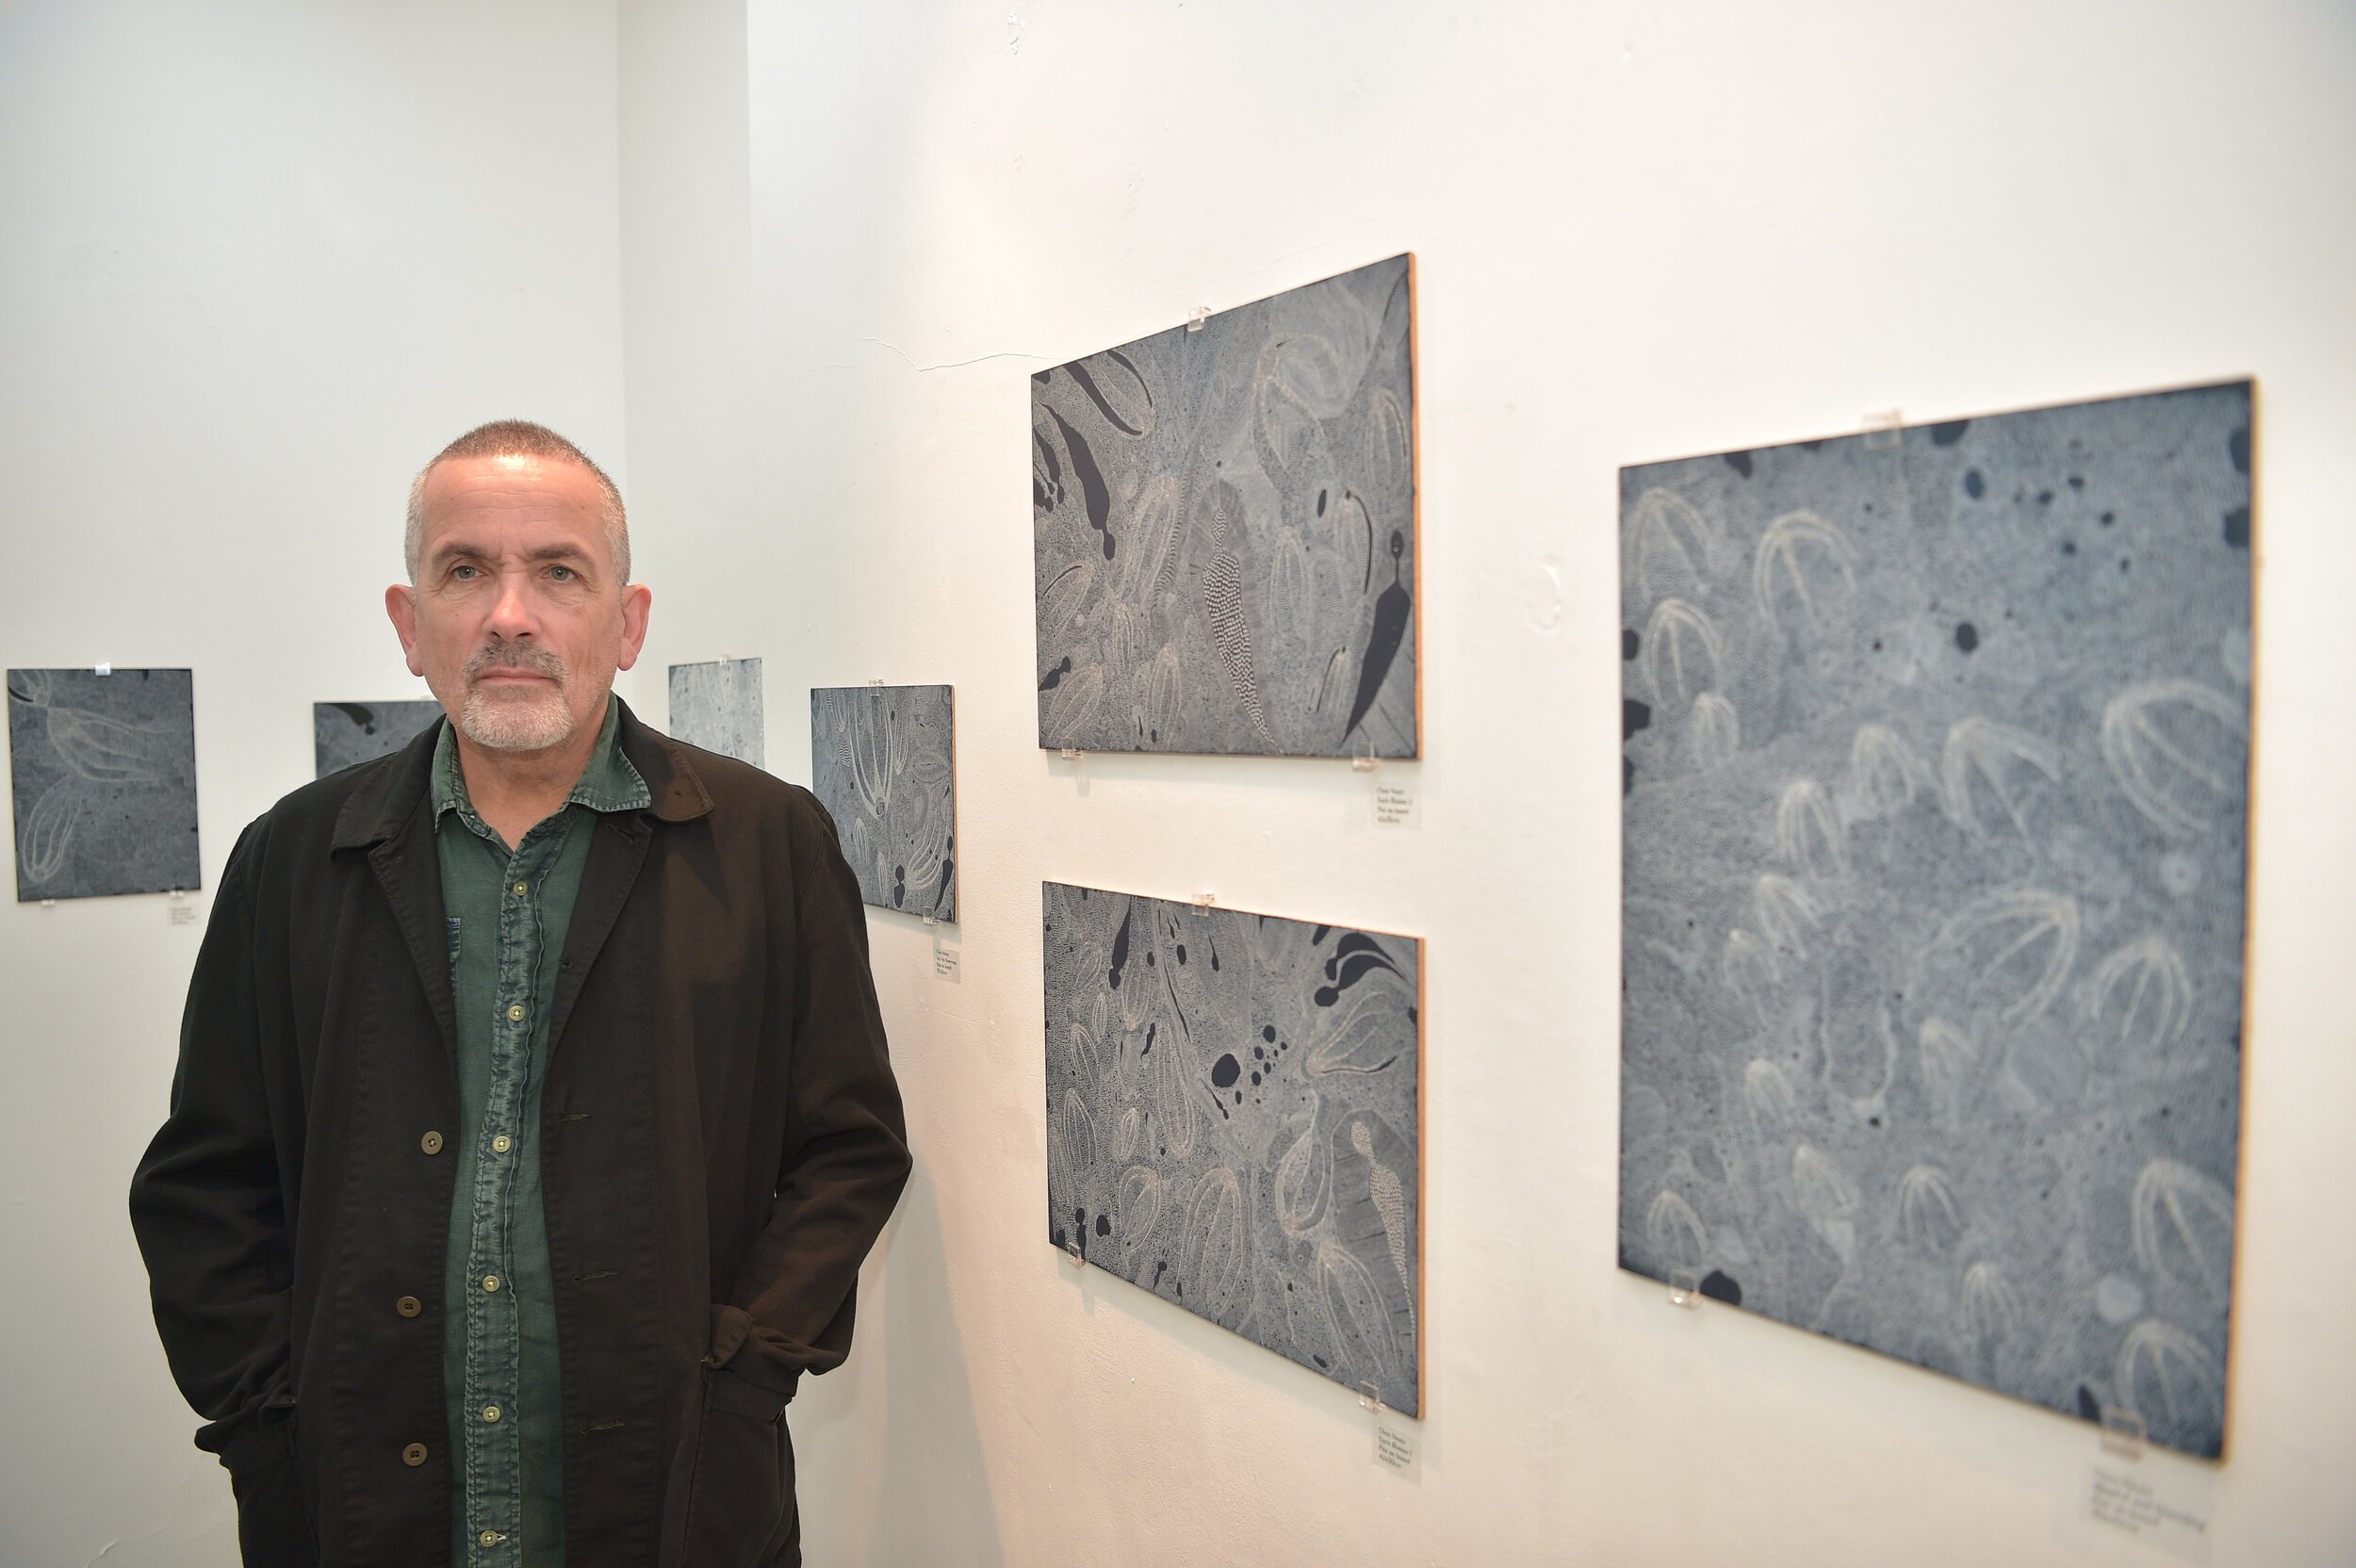   Chris Neate by his work. Photo by Andrew Hood  